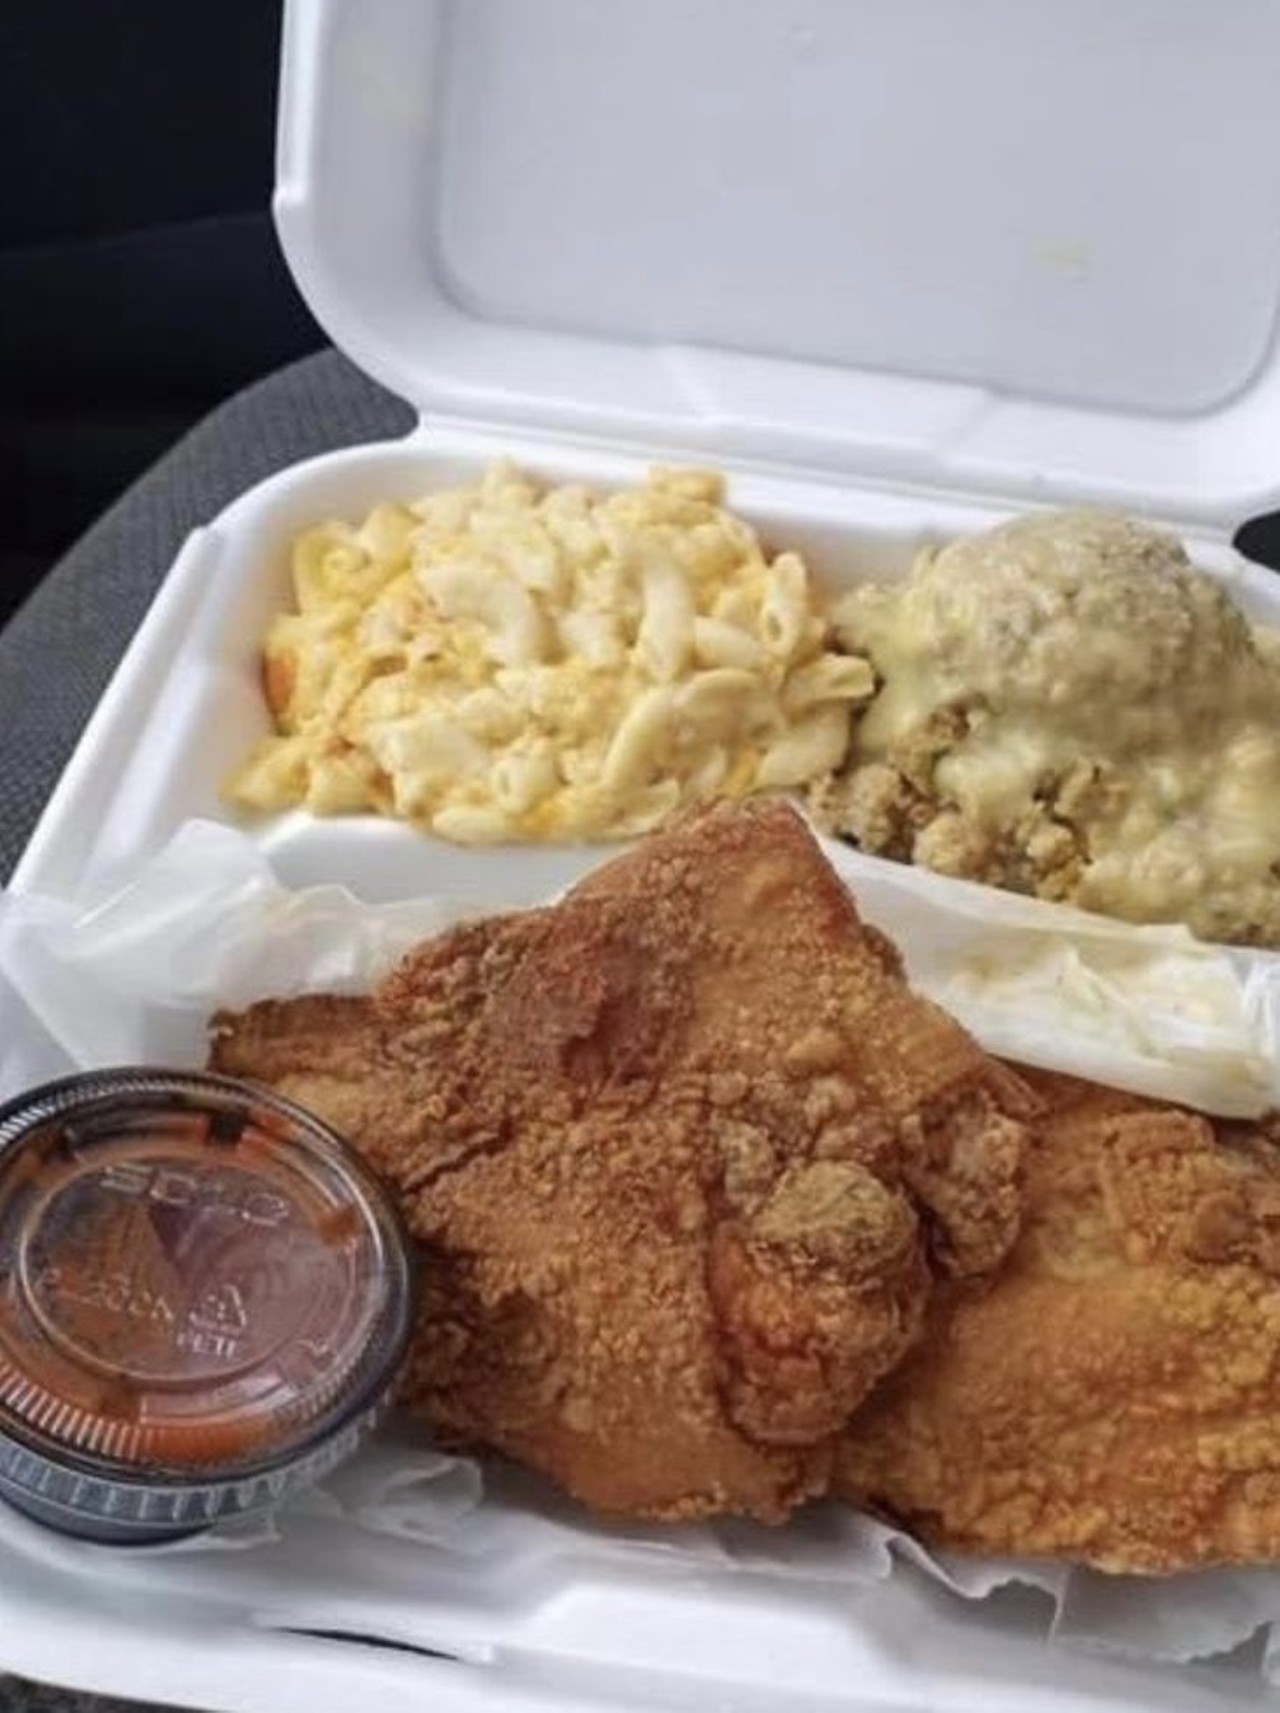 19. Moore Soulfood
3005 S. Fort St., Detroit; 313-406-9475
&#147;I demolished the catfish,Mac & cheese and greens. So flavorful and the catfish was fried to perfection.
The staff was friendly. I called in my order and it was ready within 15 minutes.&#148; - C R.
Photo via Google Maps